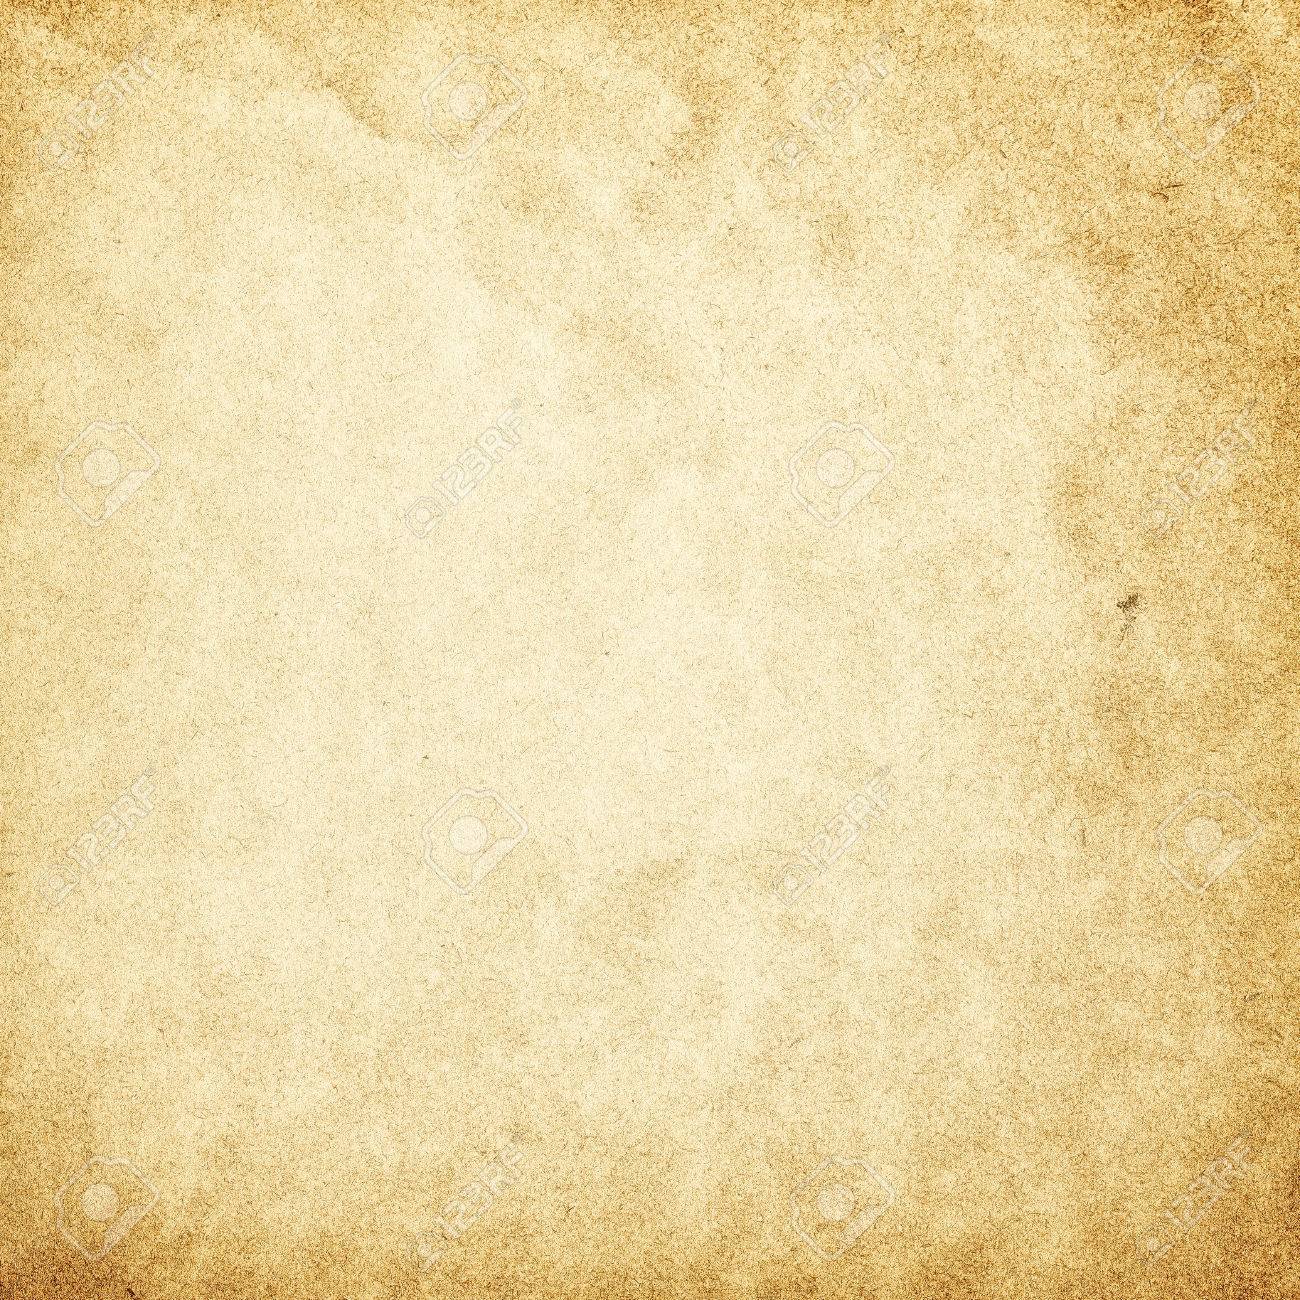 Vintage Paper Template For Texture Or Background Stock Photo